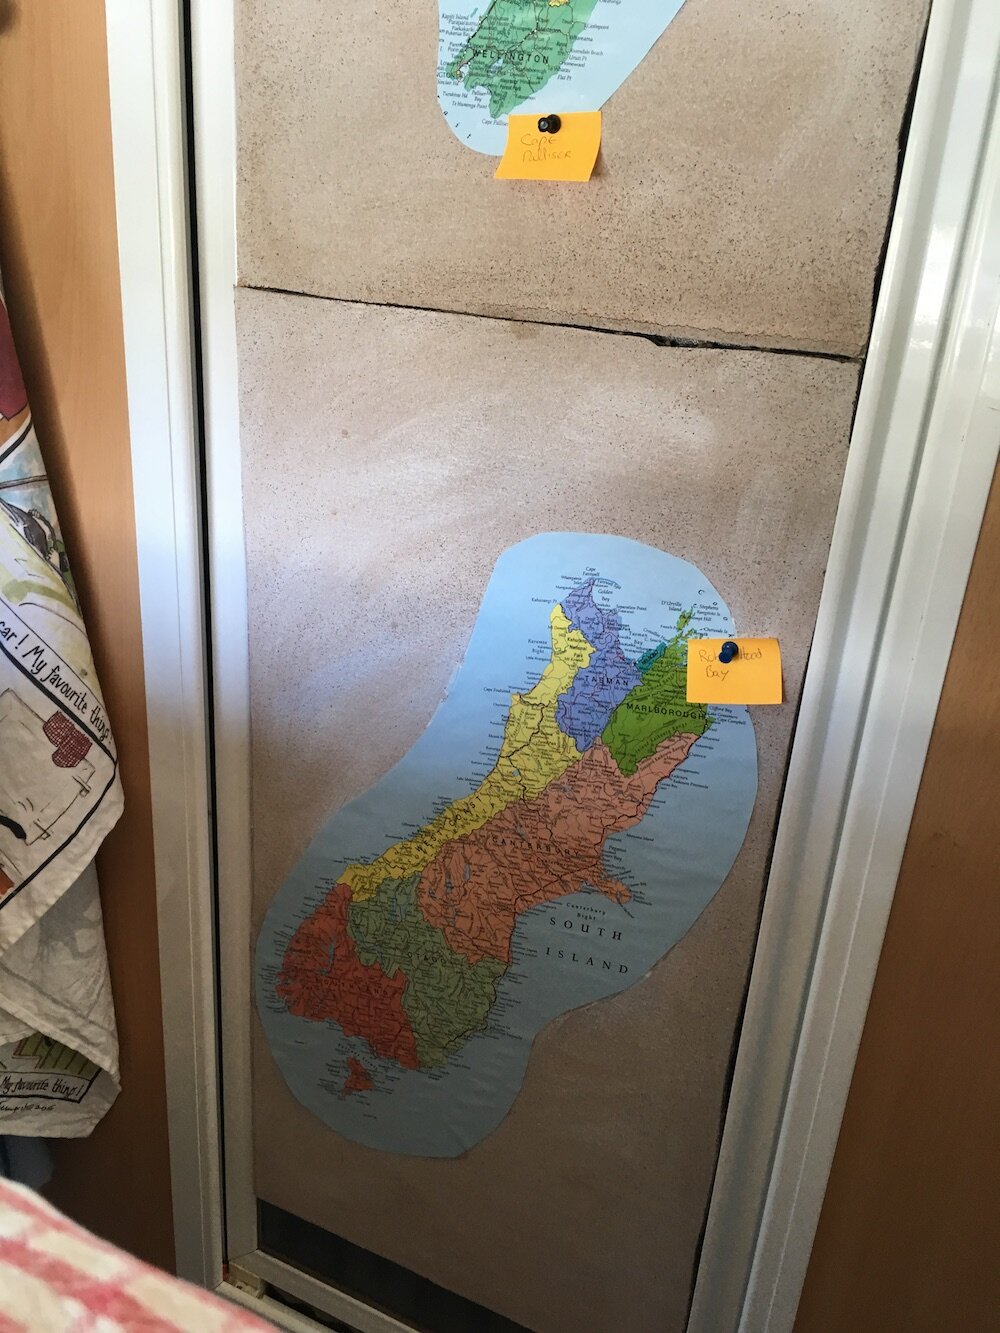  The map is glued on a cork board 